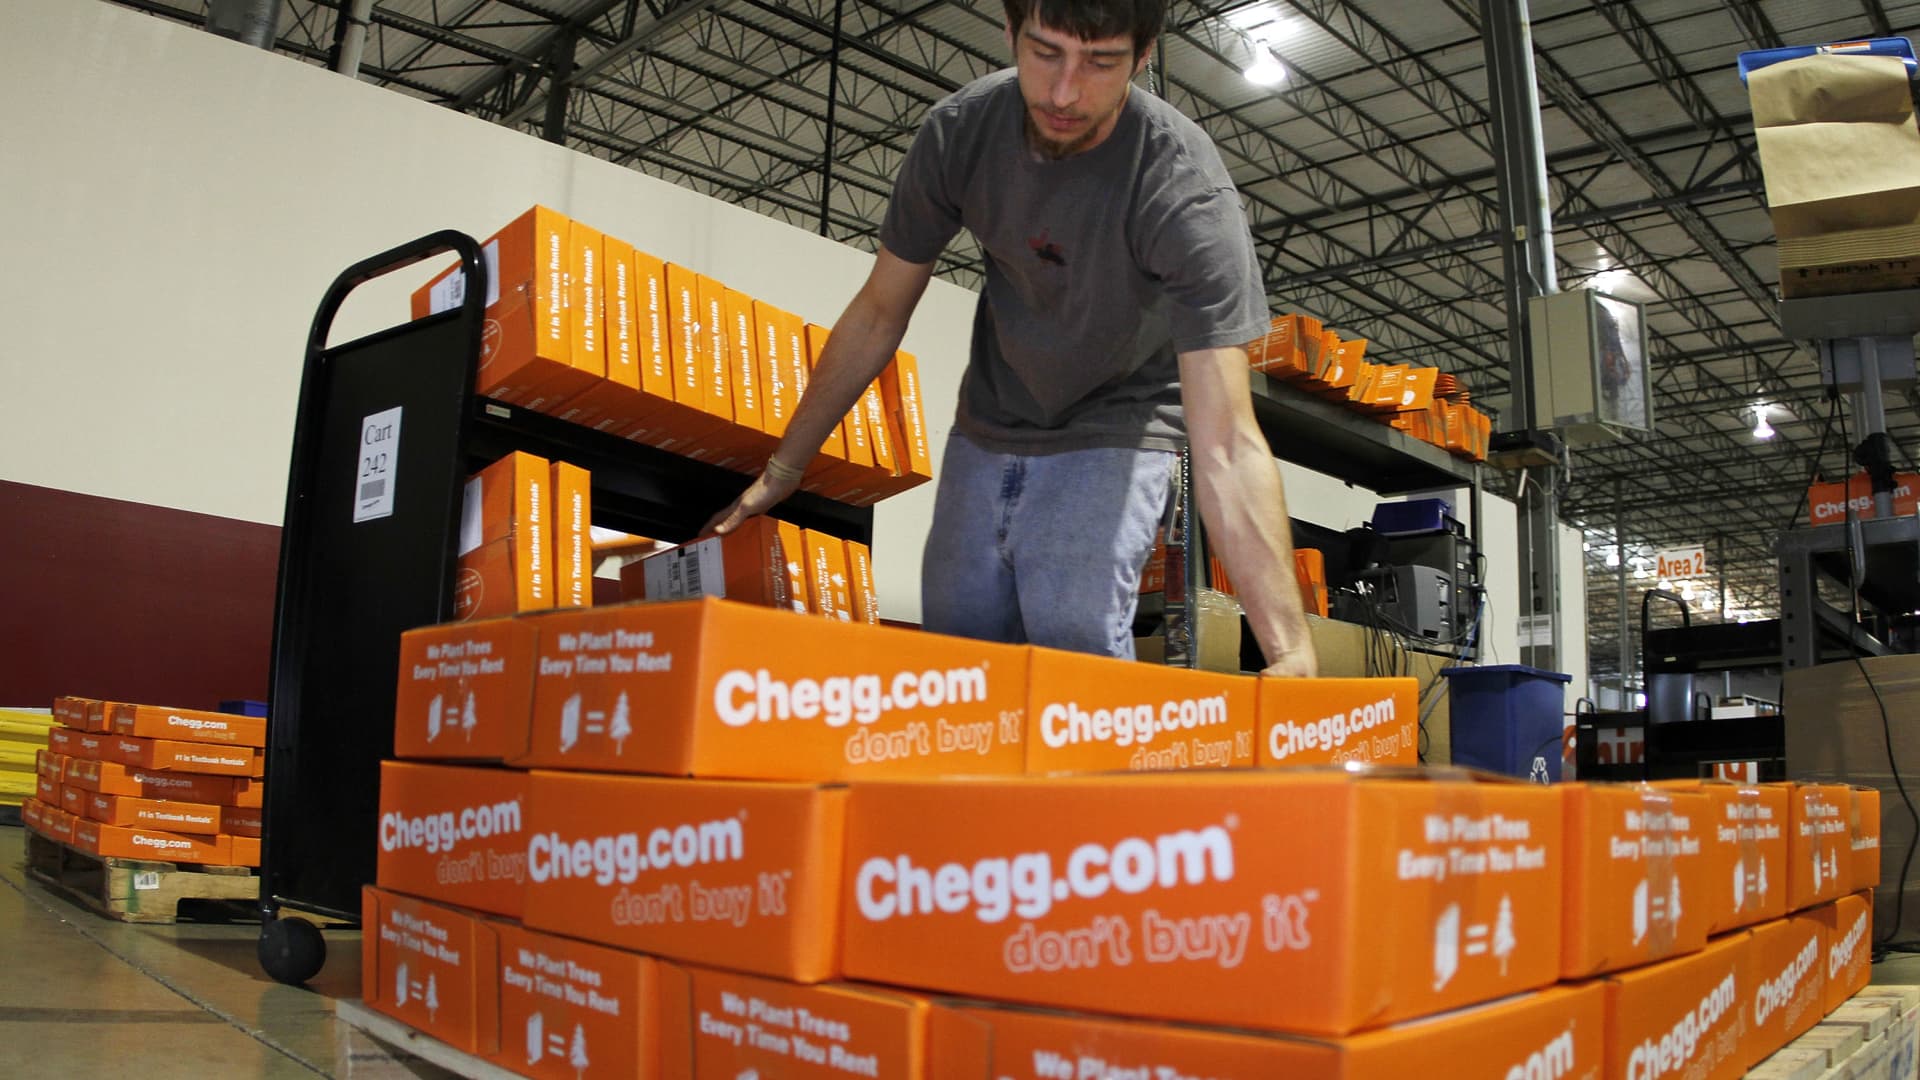 Chegg shares drop more than 40% after company says ChatGPT is killing its business